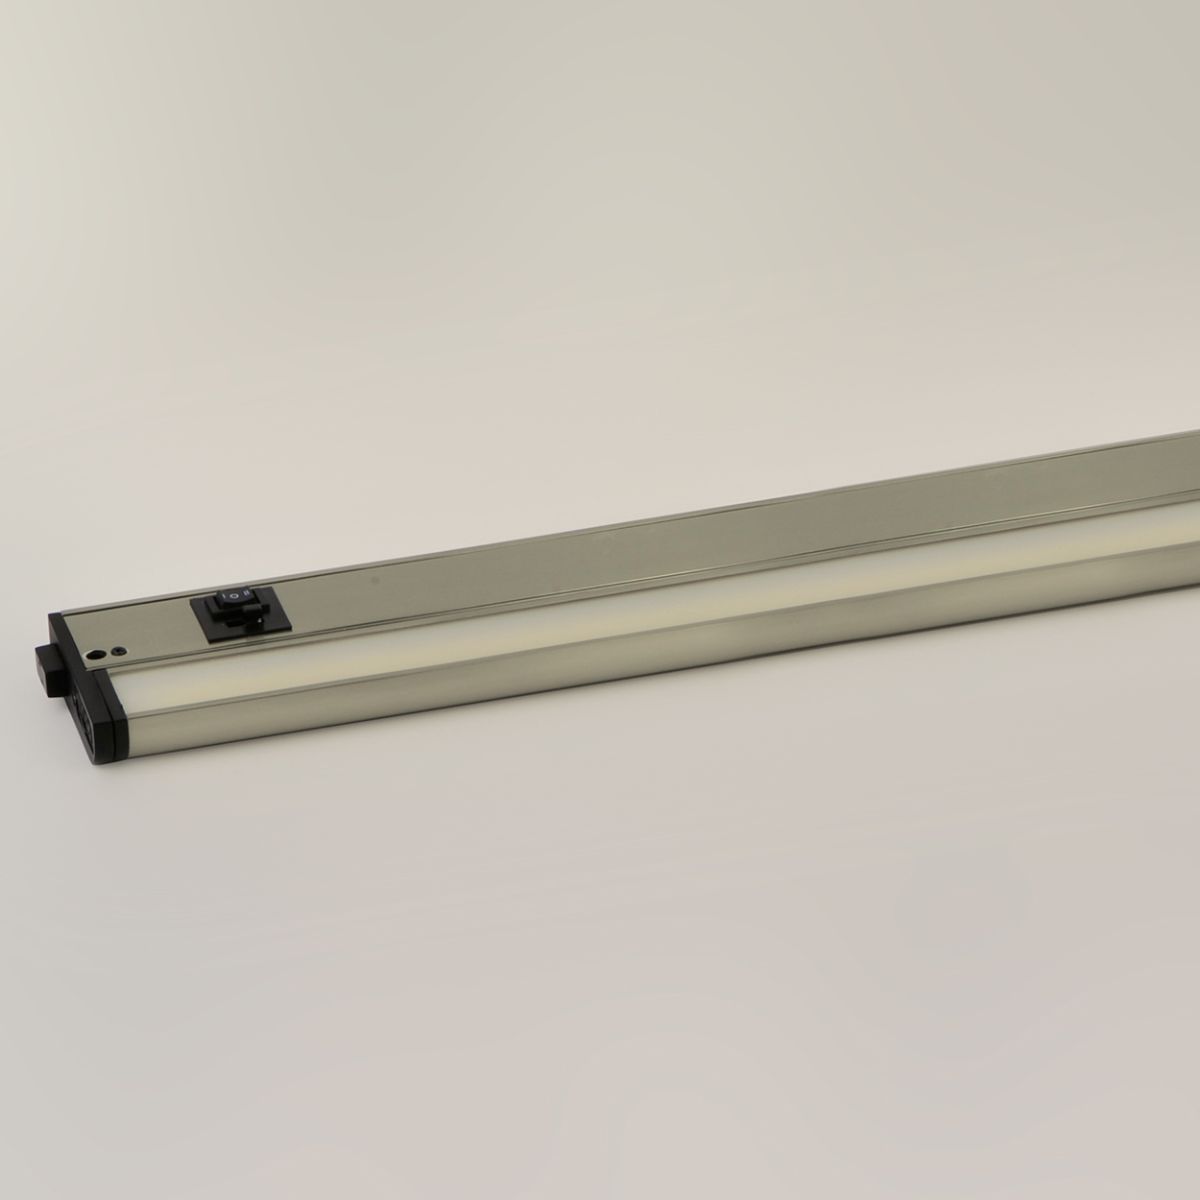 CounterMax 5K 36 Inch Under Cabinet LED Light with Patent gimbals, 2220 Lumens, Linkable, CCT Selectable 2700K to 5000K, 120V